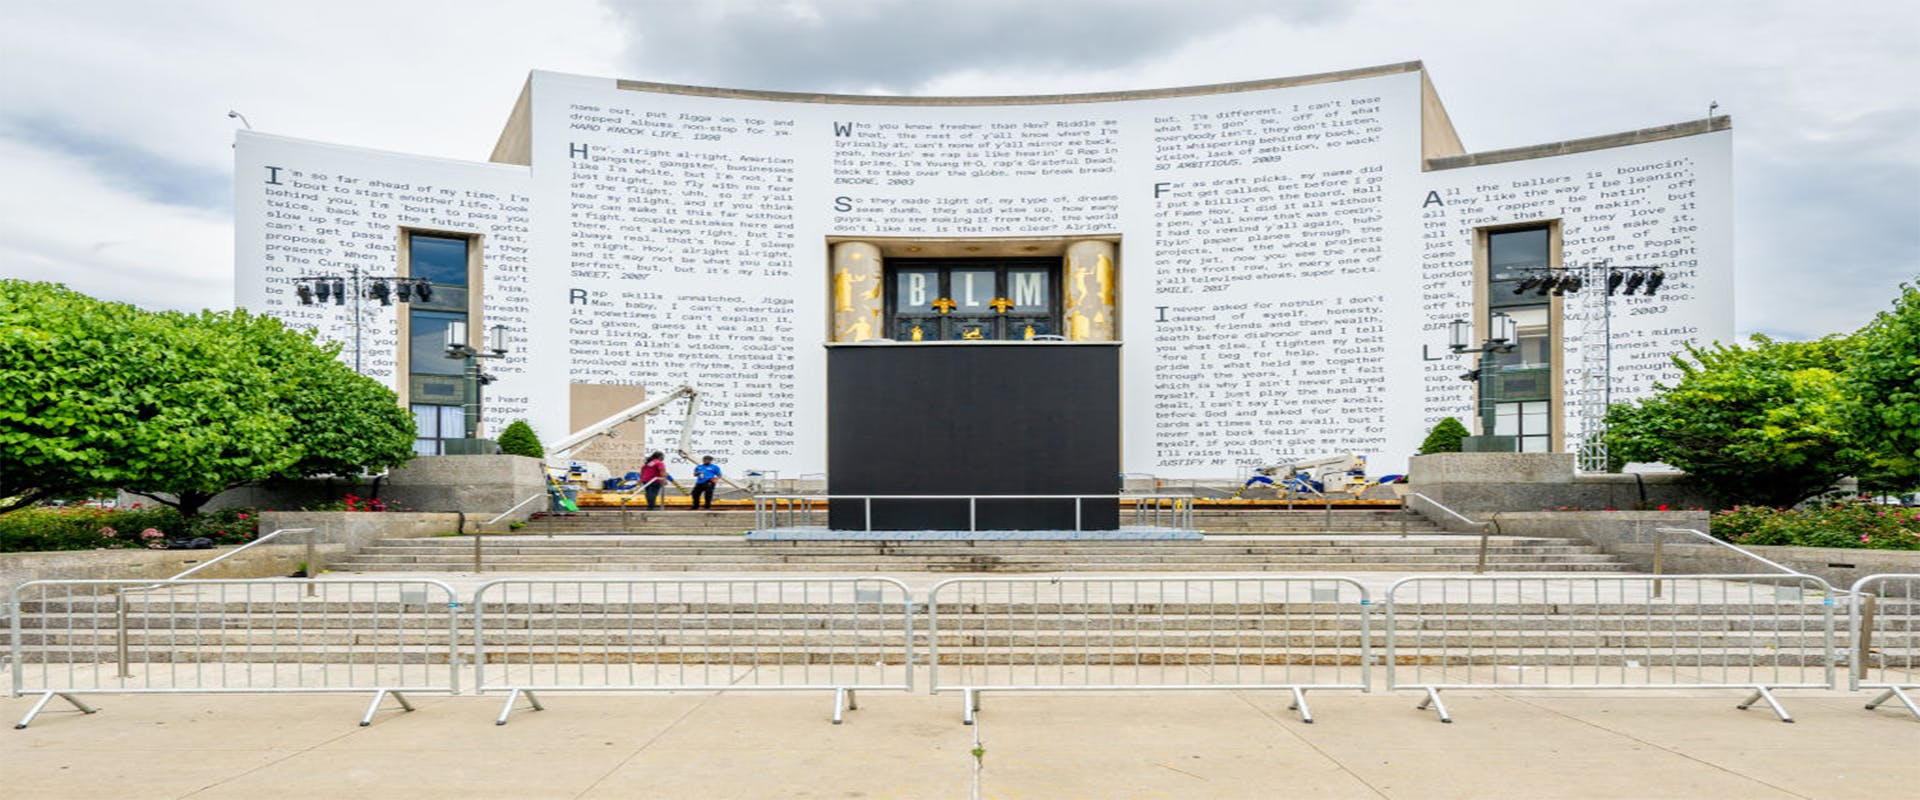 NEW YORK, NEW YORK - JULY 10: A view of the Central Library Building of the Brooklyn Public Library in Grand Army Plaza as it's being covered with lyrics by artist Jay-Z in celebration of 50 years of Hip-Hop on July 10, 2023 in New York City. The arch was completed in 1892 by architect John H. Duncan. 